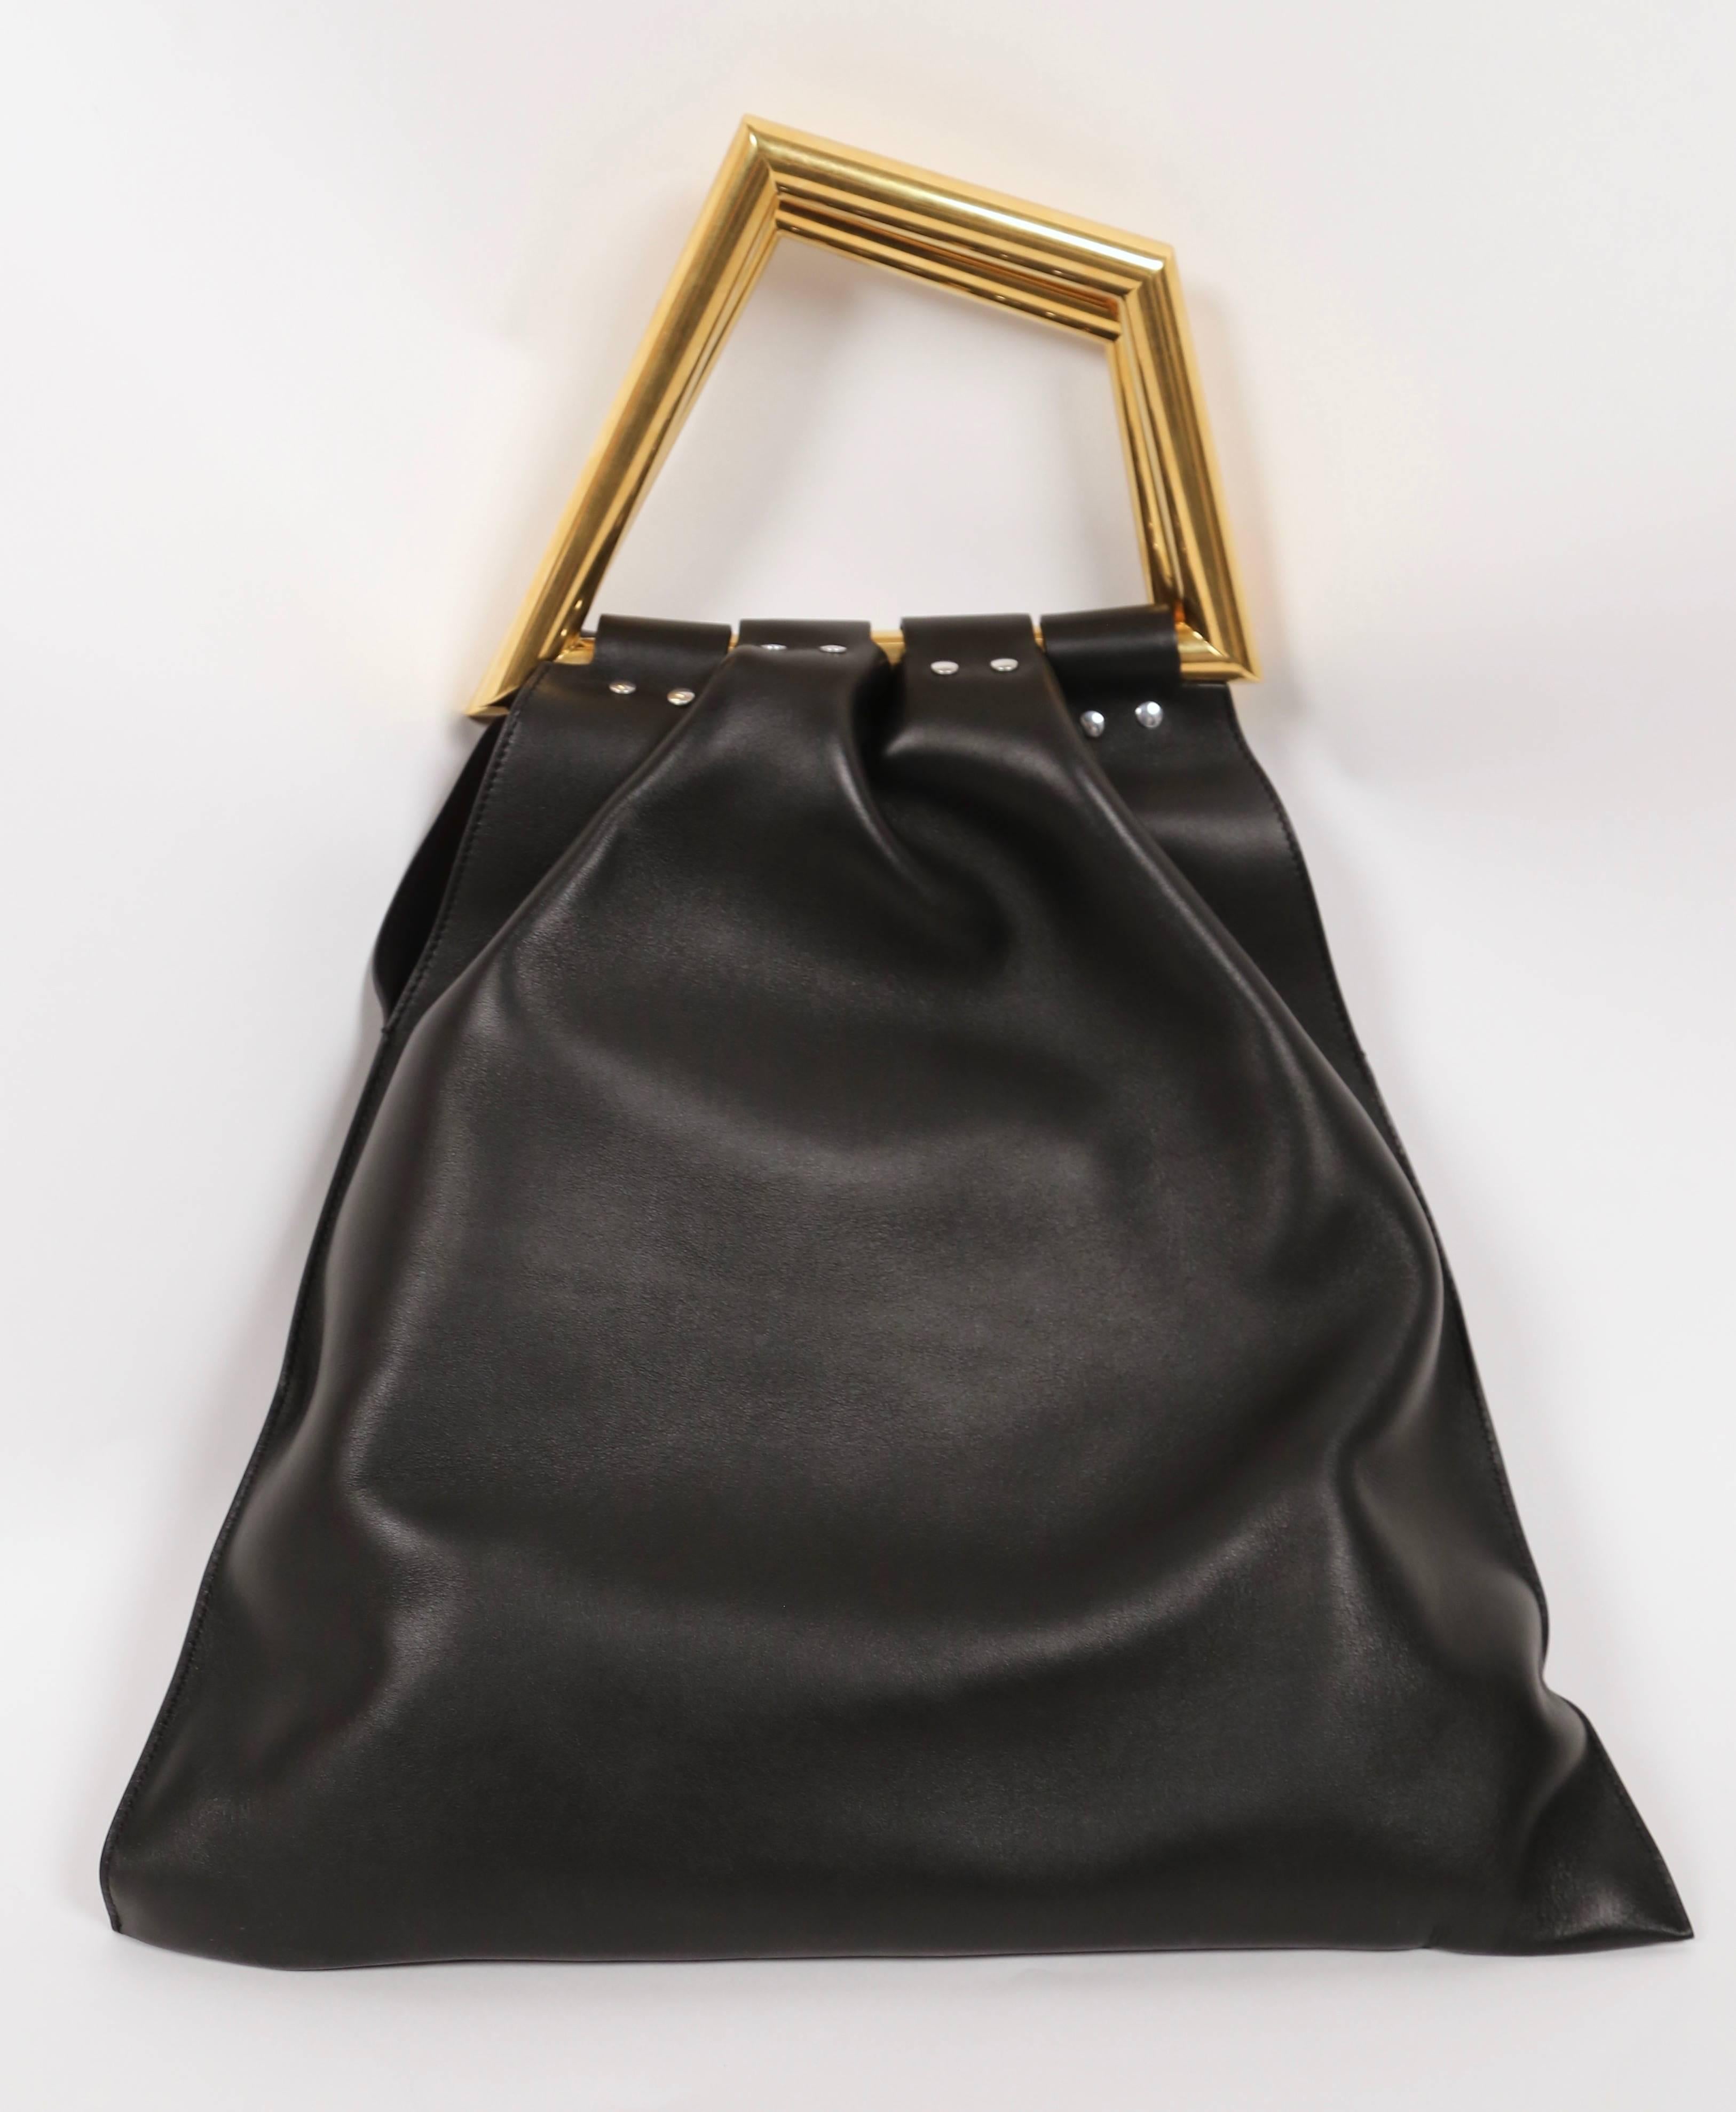 Black leather 'TRIANGLE HANDLE BAG' designed by Phoebe Philo for Celine dating to spring of 2014 exactly as seen on the runway. Color is all black leather with brass/gold metal handle and silver grommets. There are two gold-toned metal top handles,